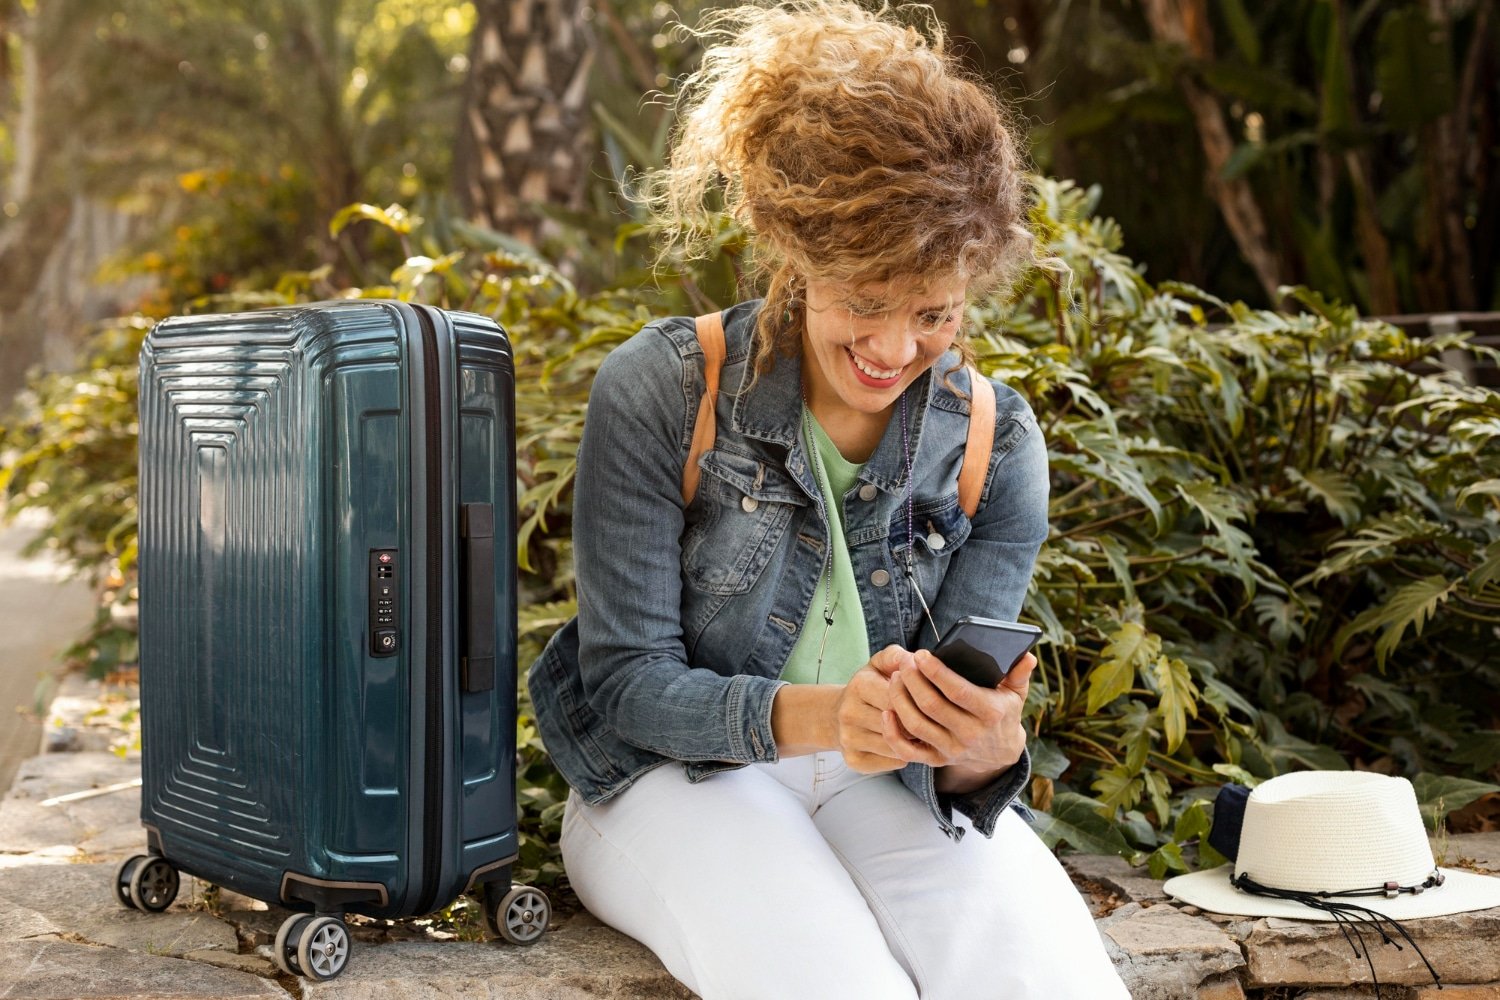 Travel Smart With Eagle Creek’s Durable Luggage Solutions